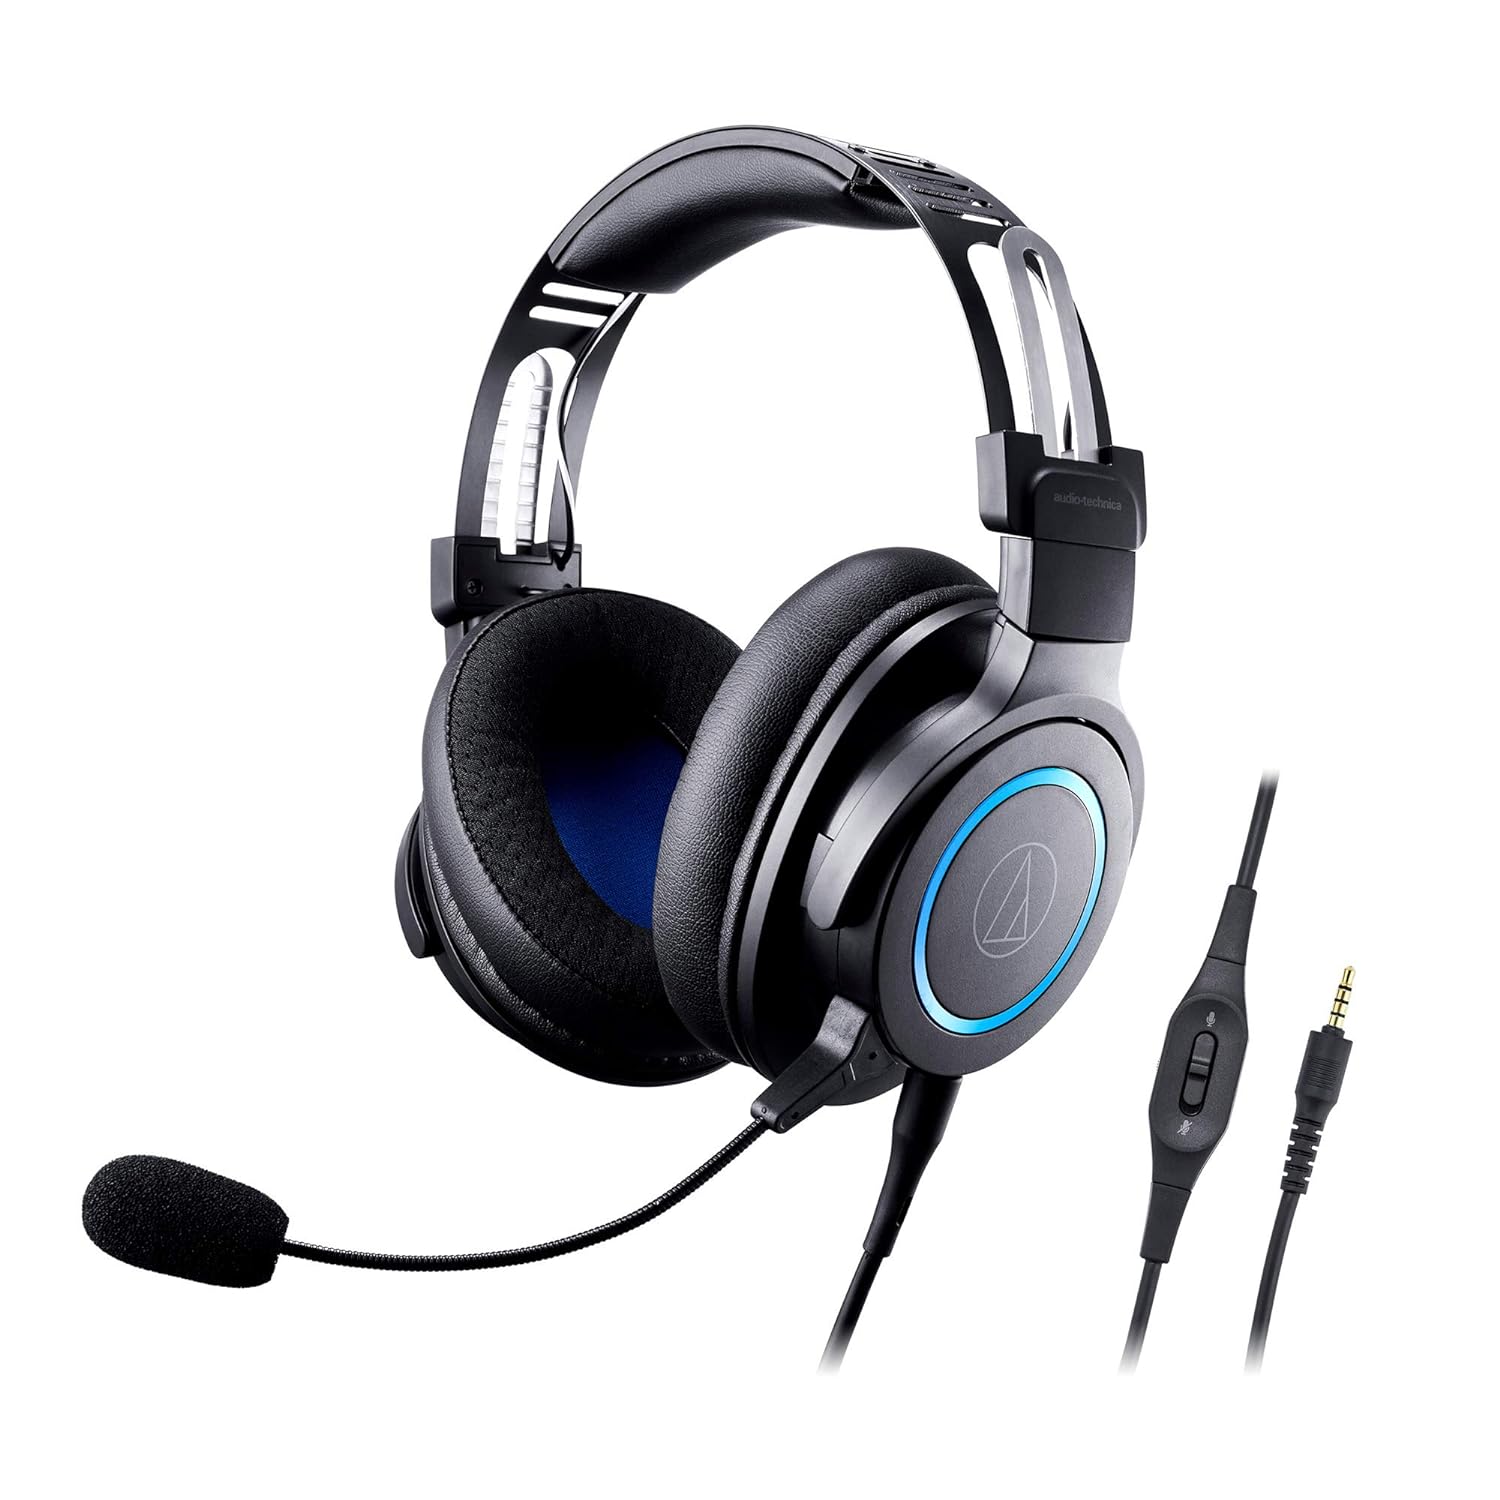 Audio-Technica ATH-G1 Premium Headset with Detachable Mic, 3.5mm TRRS Connector